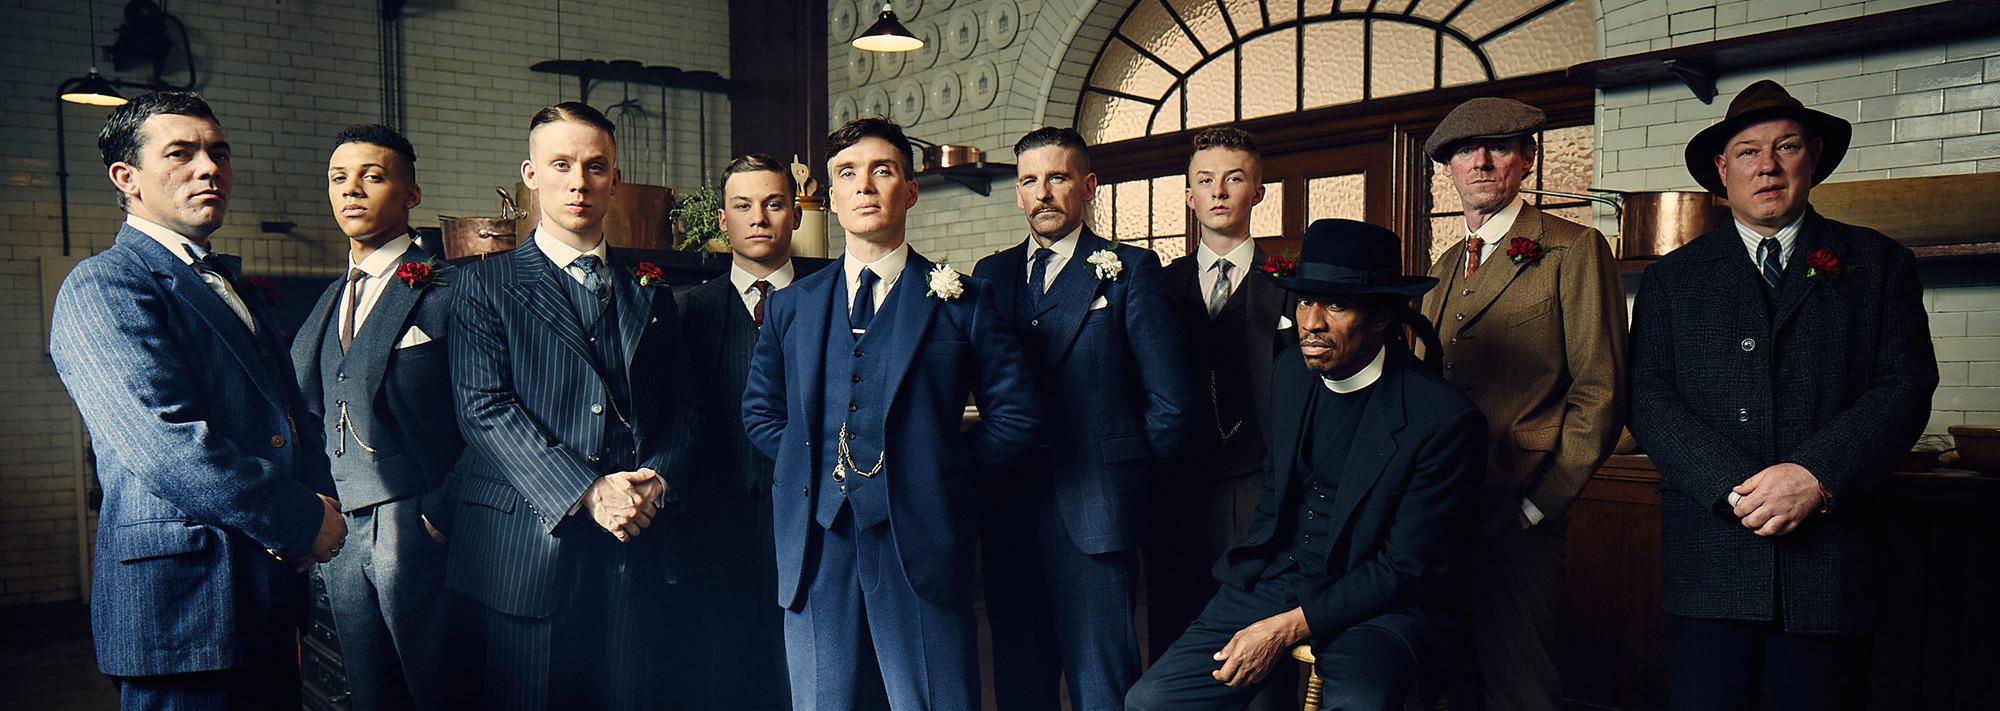 Free download Peaky Blinders Wallpaper and Background Image stmednet [2000x711] for your Desktop, Mobile & Tablet. Explore Peaky Blinders Wallpaper. Peaky Blinders Wallpaper